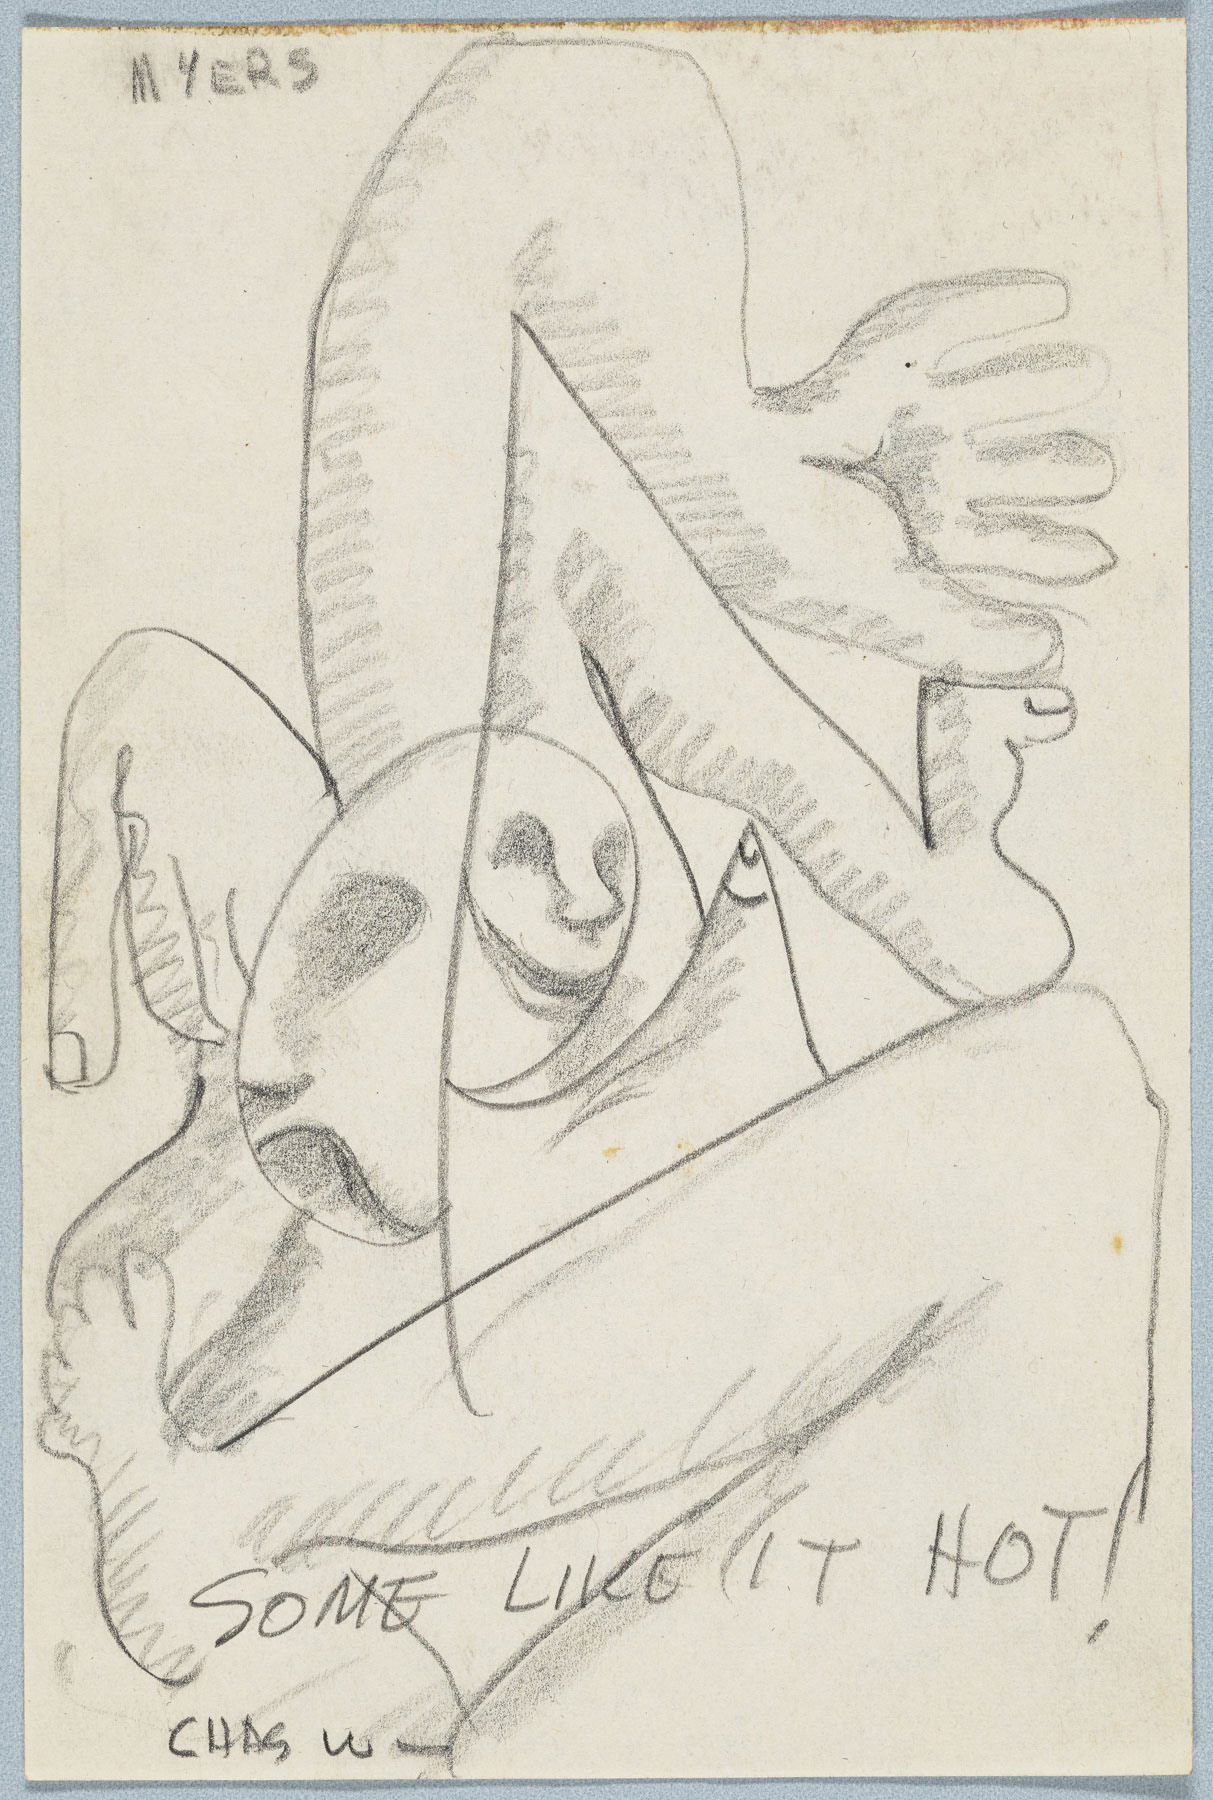 Abstract pencil drawing of a jumble of feet, hands, and faces above the words “Some like it hot!”